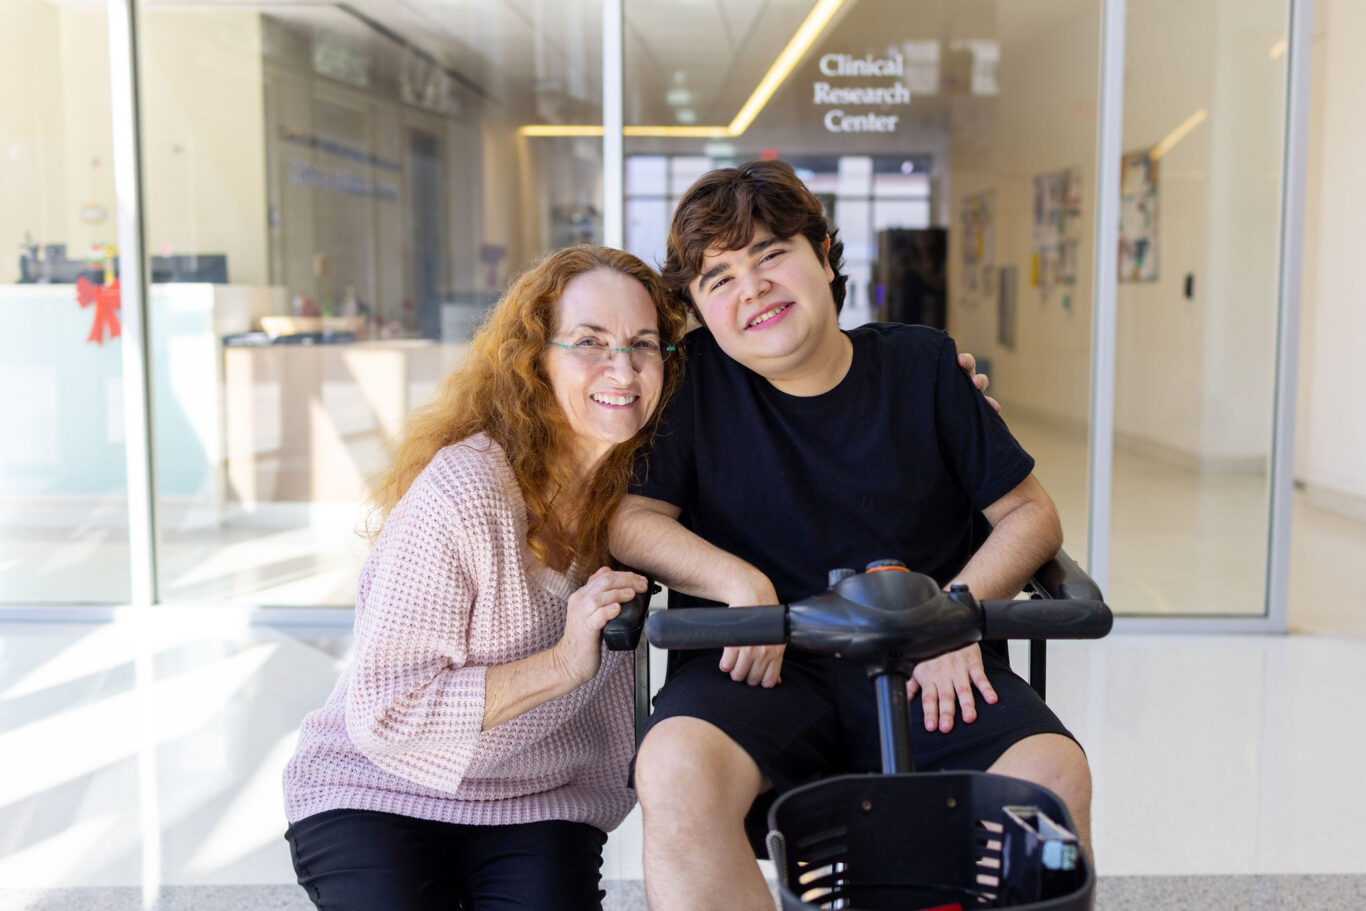 Dr. Claudia Senesac (left) and boy with Duchenne muscular dystrophy (right)